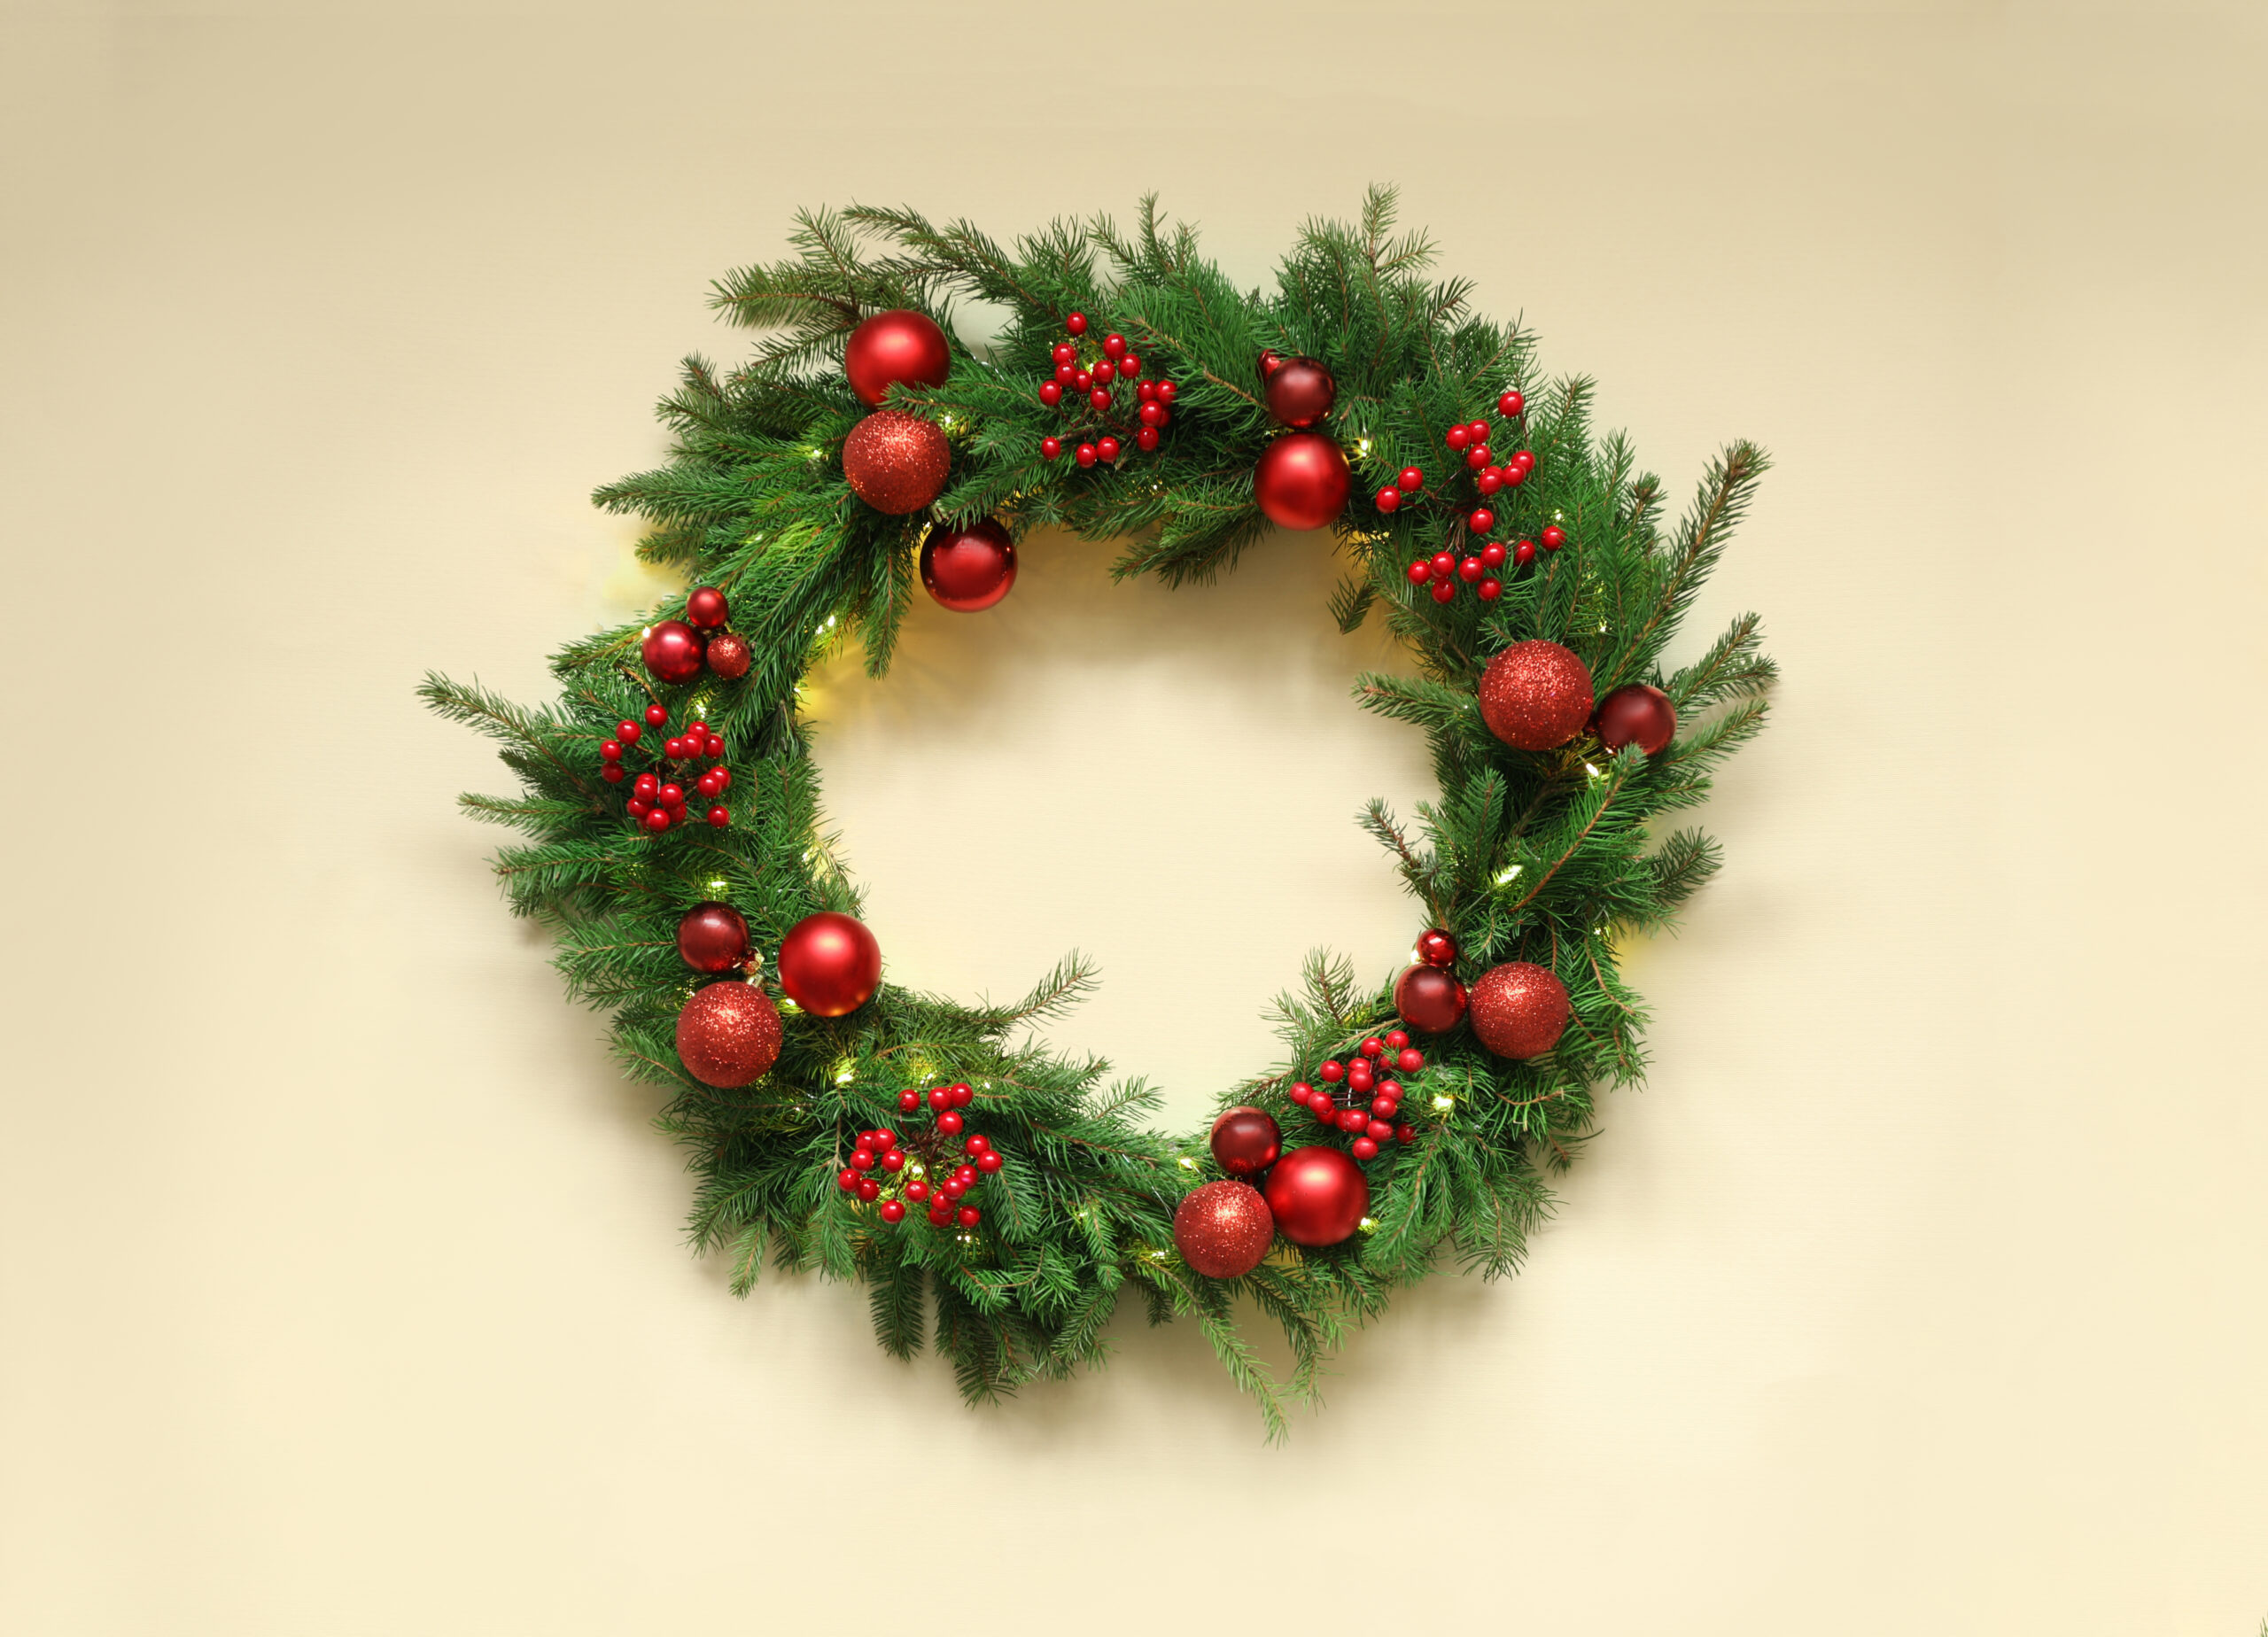 Christmas wreath with baubles